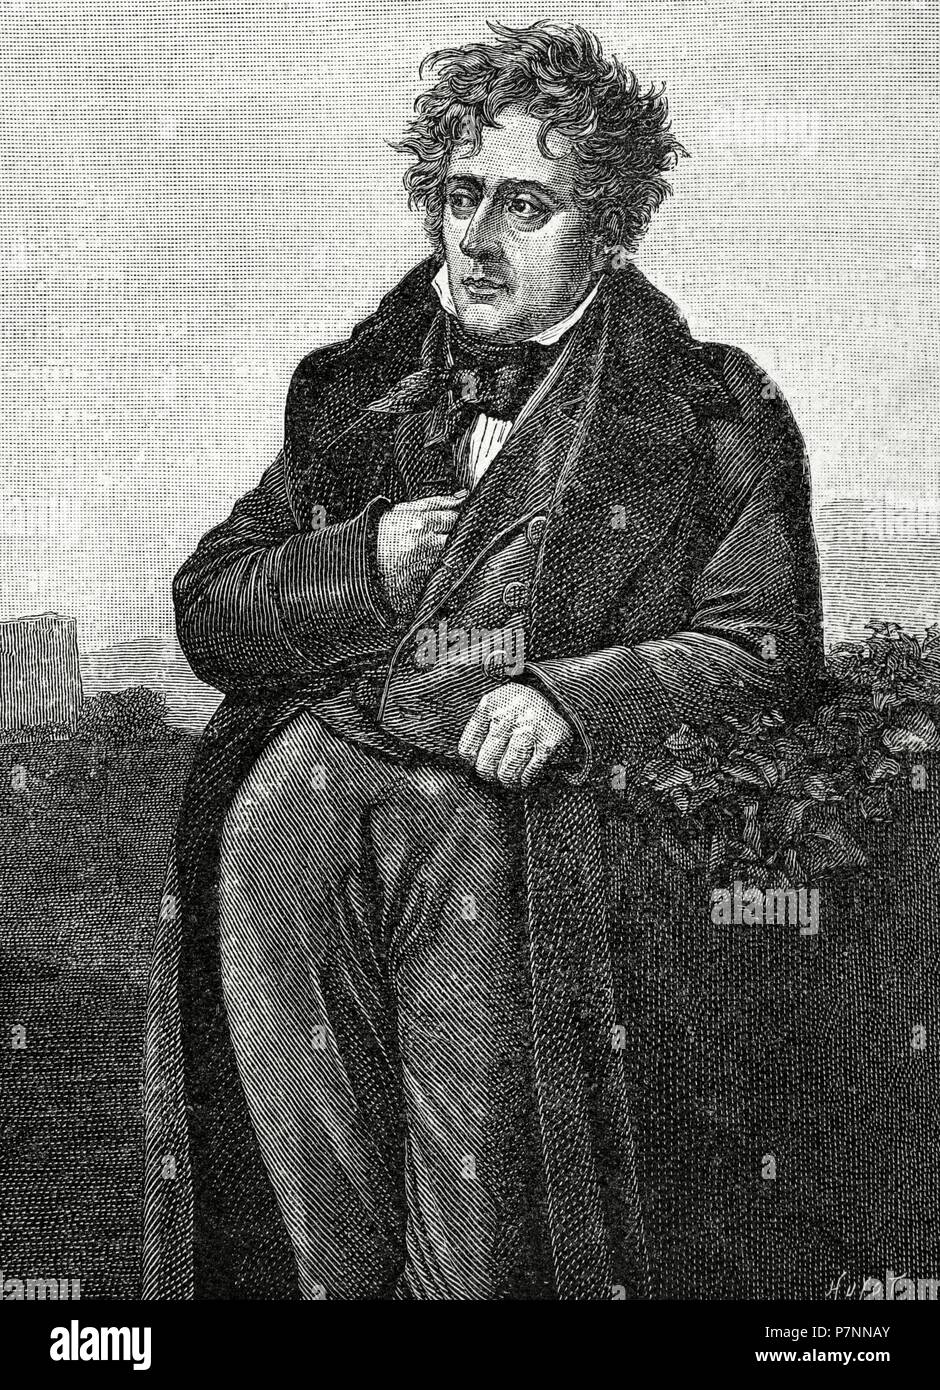 Chateaubriand, Franc ois Rene, Vicomte de (1768-1848). French writer and member of the French Academy (1811). Portrait. engraving by Huyot. 'Historia de Francia', 1883. Stock Photo